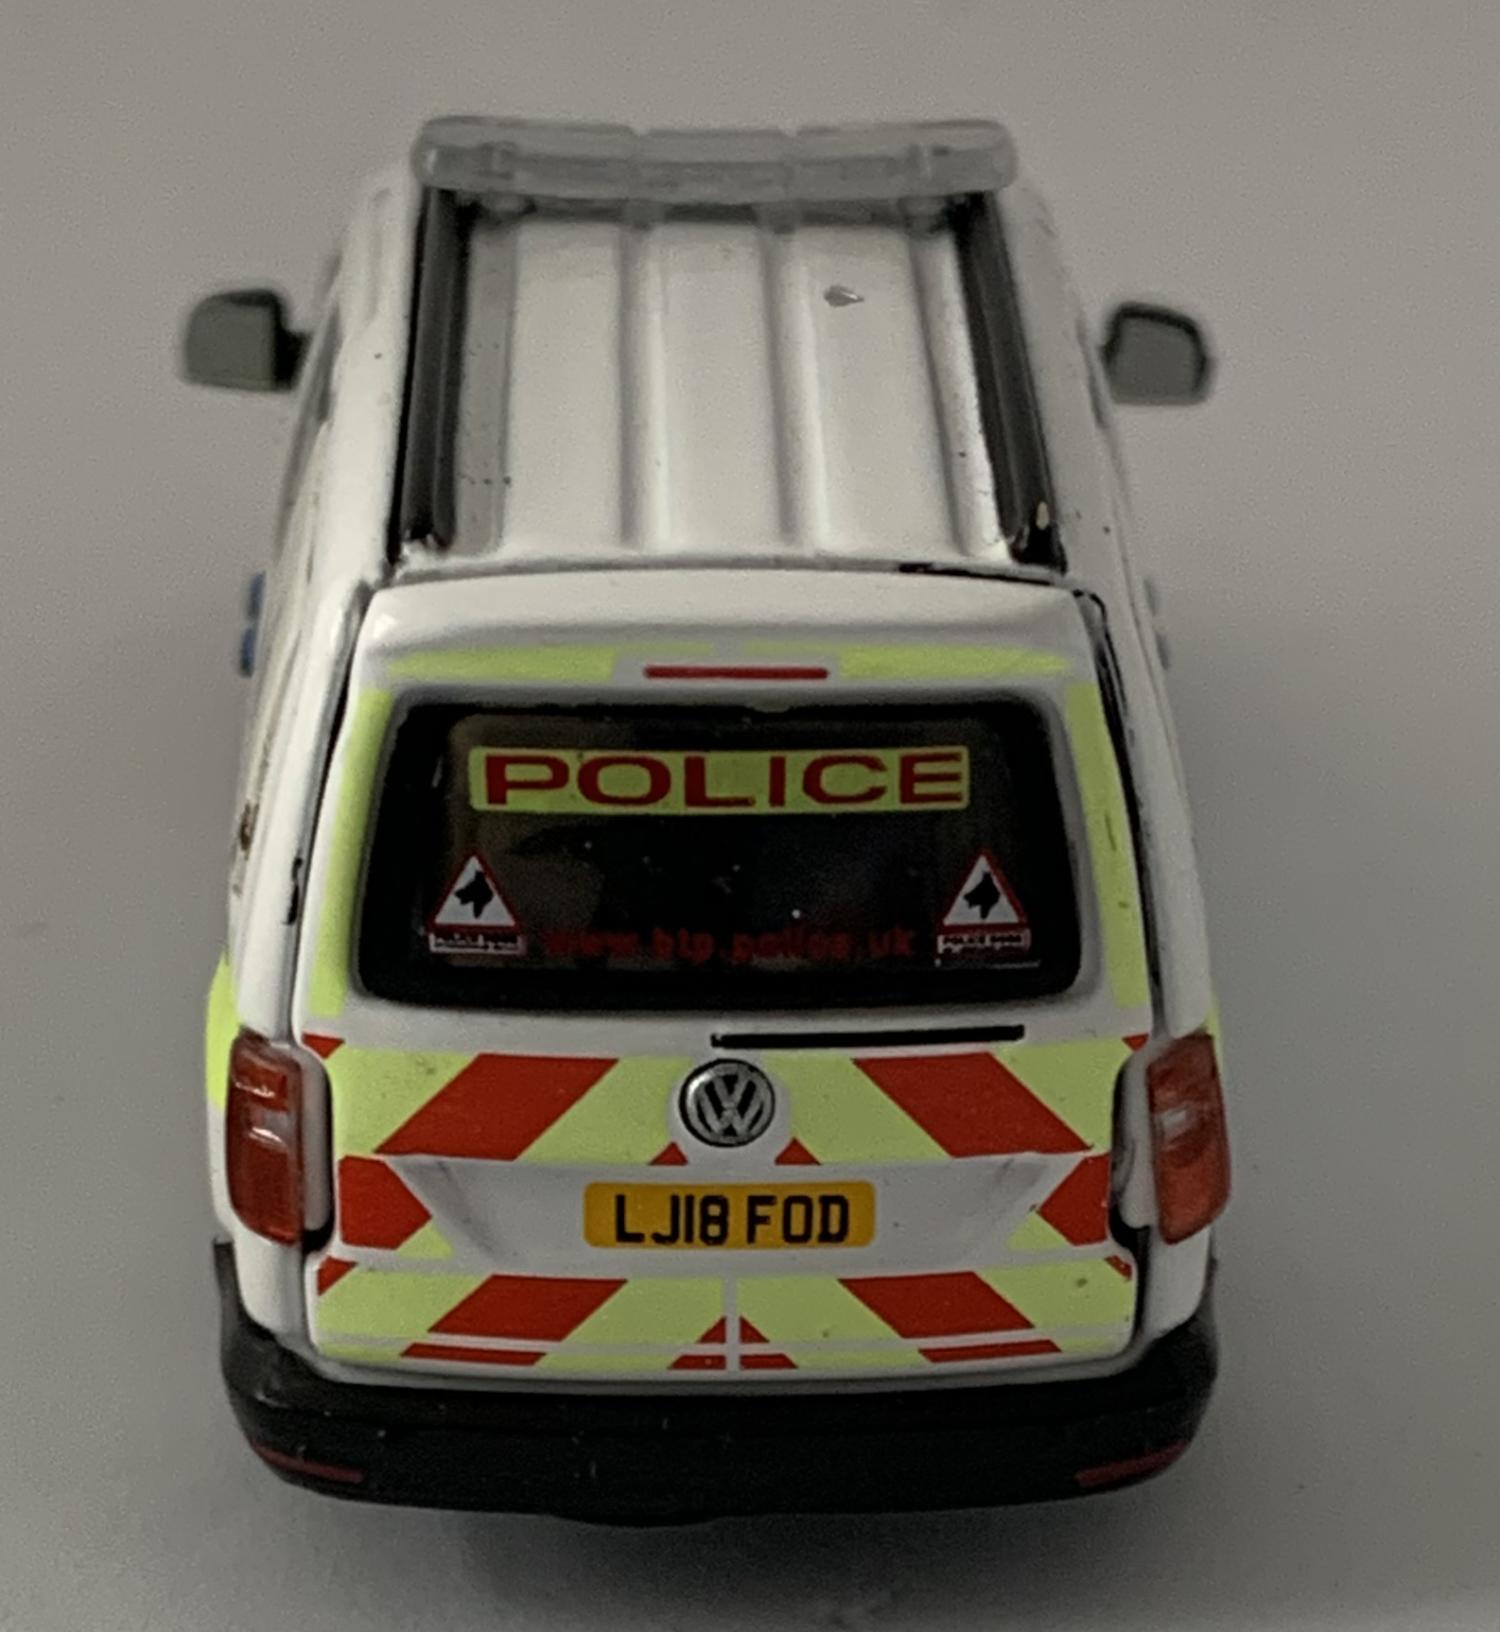 A good reproduction of the VW Caddy Maxi with detail throughout, all authentically recreated. The model is presented in a box, the car is approx. 7.5 cm long and the box is 9 cm long